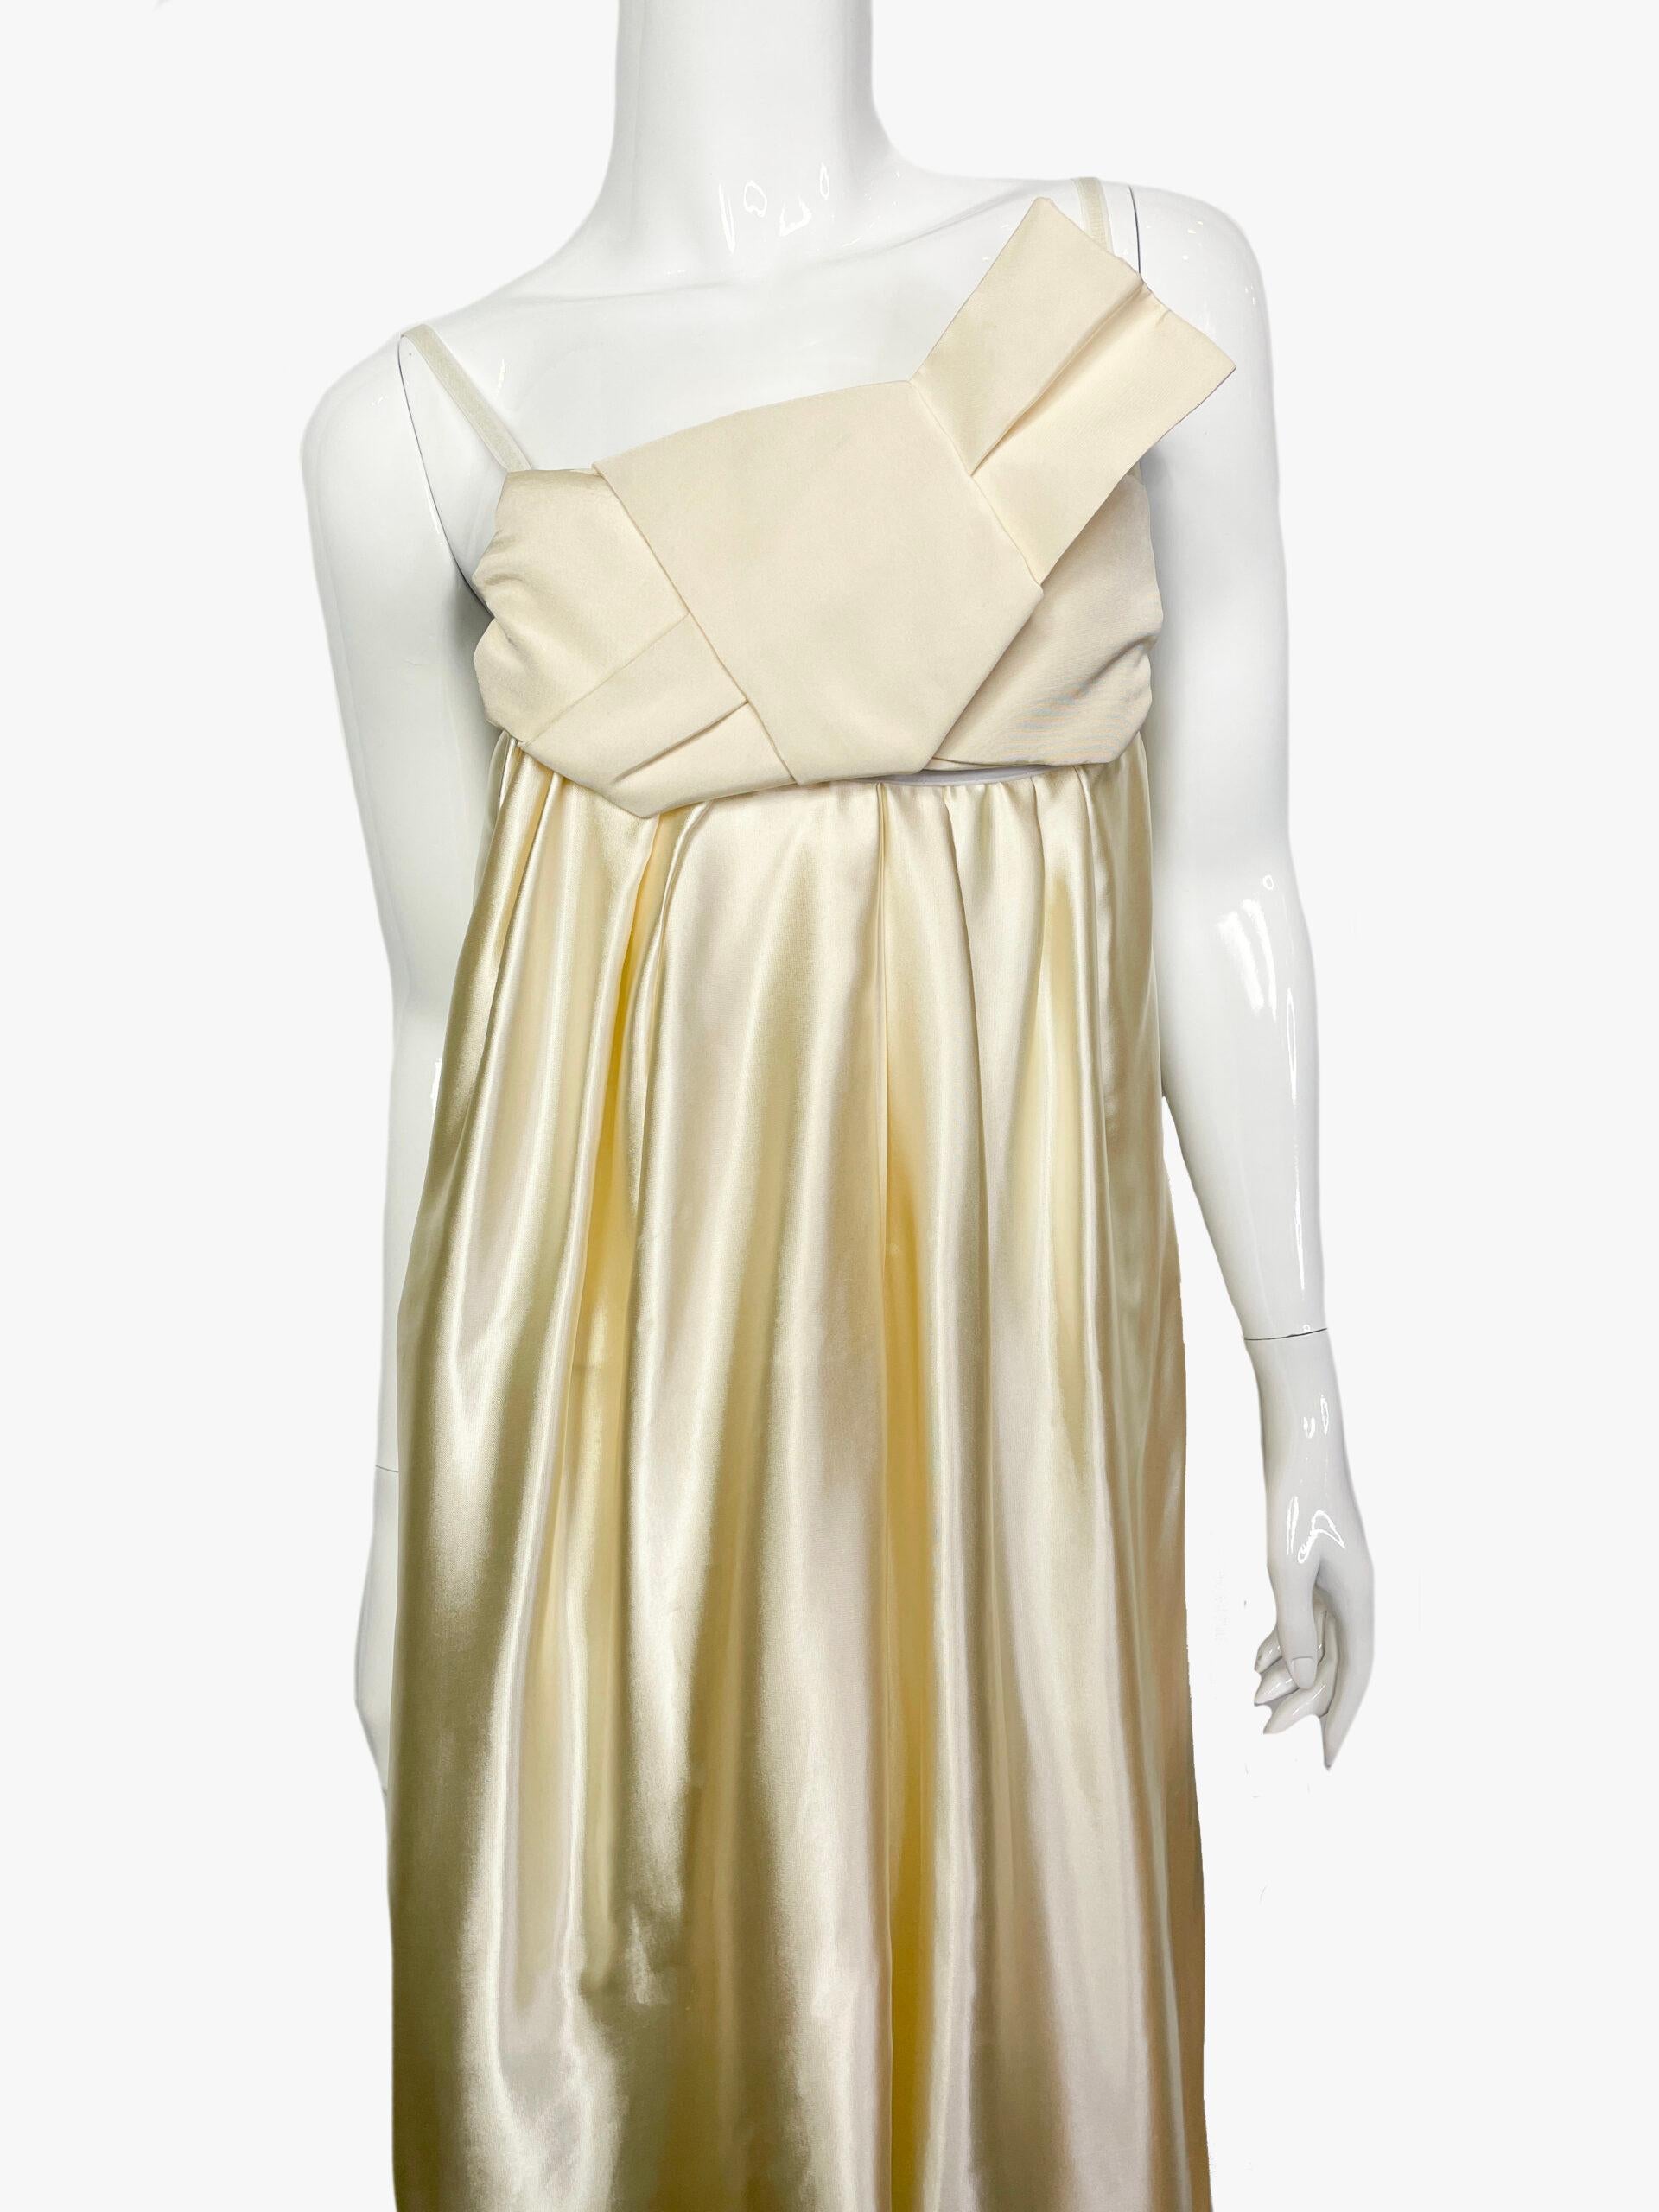 Silk dress by Lanvin, 2006 collection. Loose fit, Spaghetti straps, bow accent draping on the chest.

Additional information:
Fabric: 100% silk
Size: 38/M
Condition: Very good
........Additional information ........

- Photo might be slightly